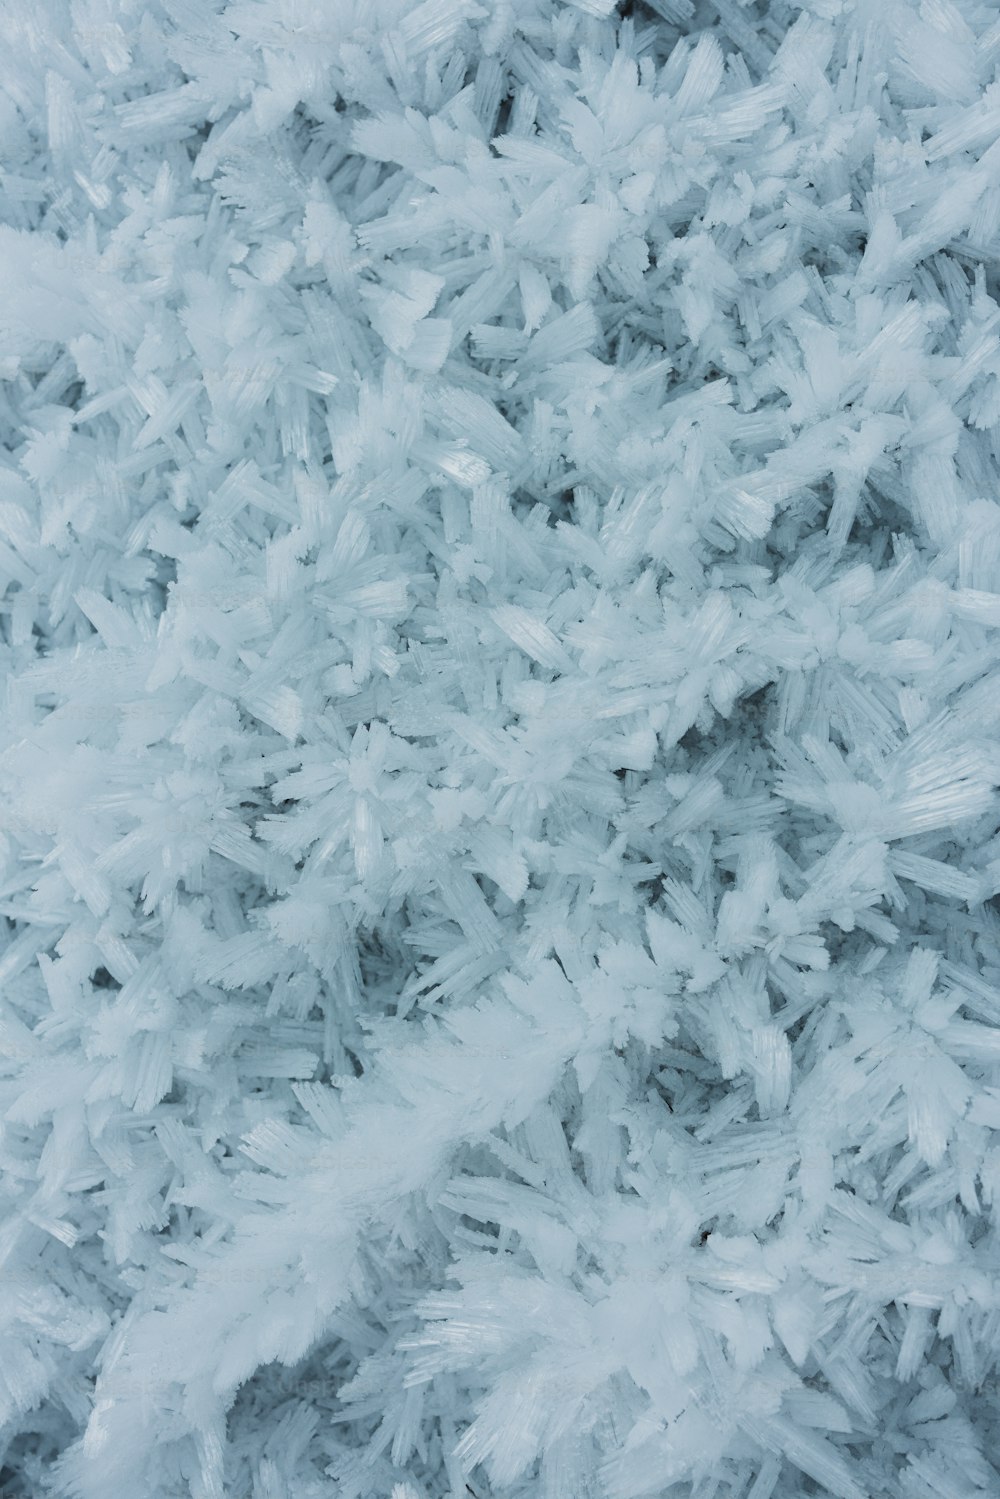 a close up of a pile of snow